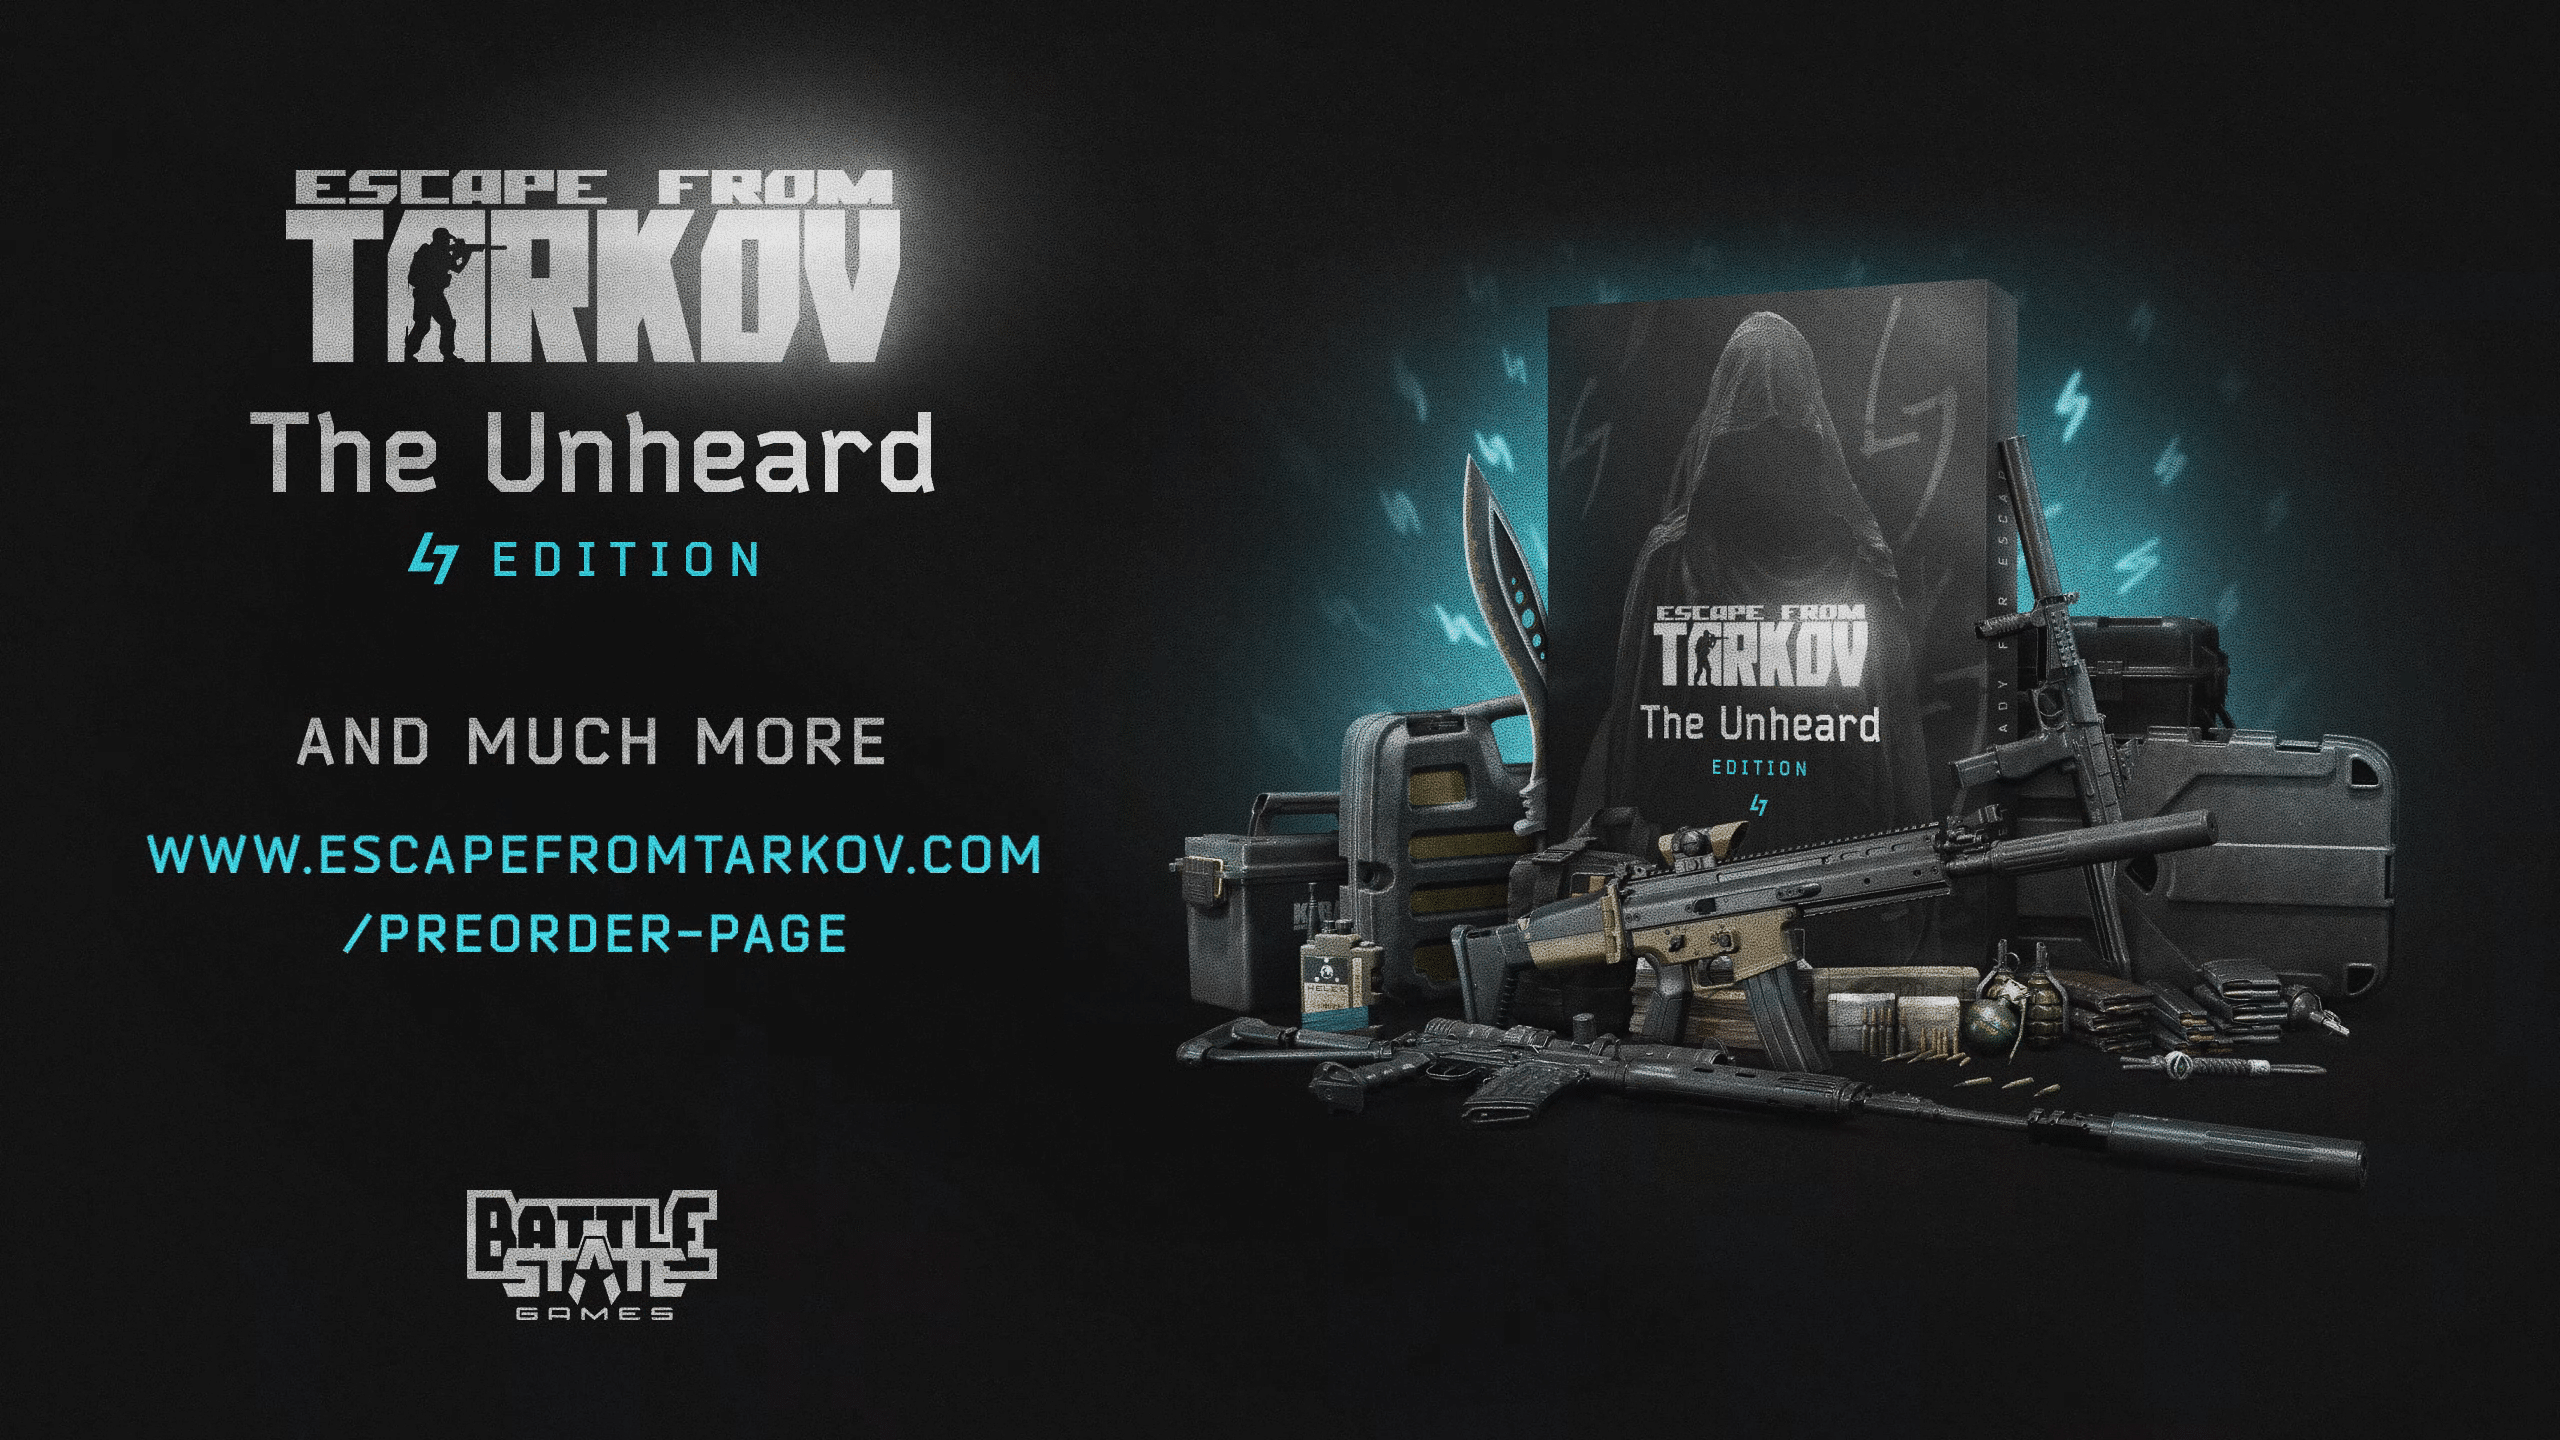 Escape from Tarkov Unheard Edition Reneges on Promised Content Behind $250 Price Tag Sparking Community Outrage